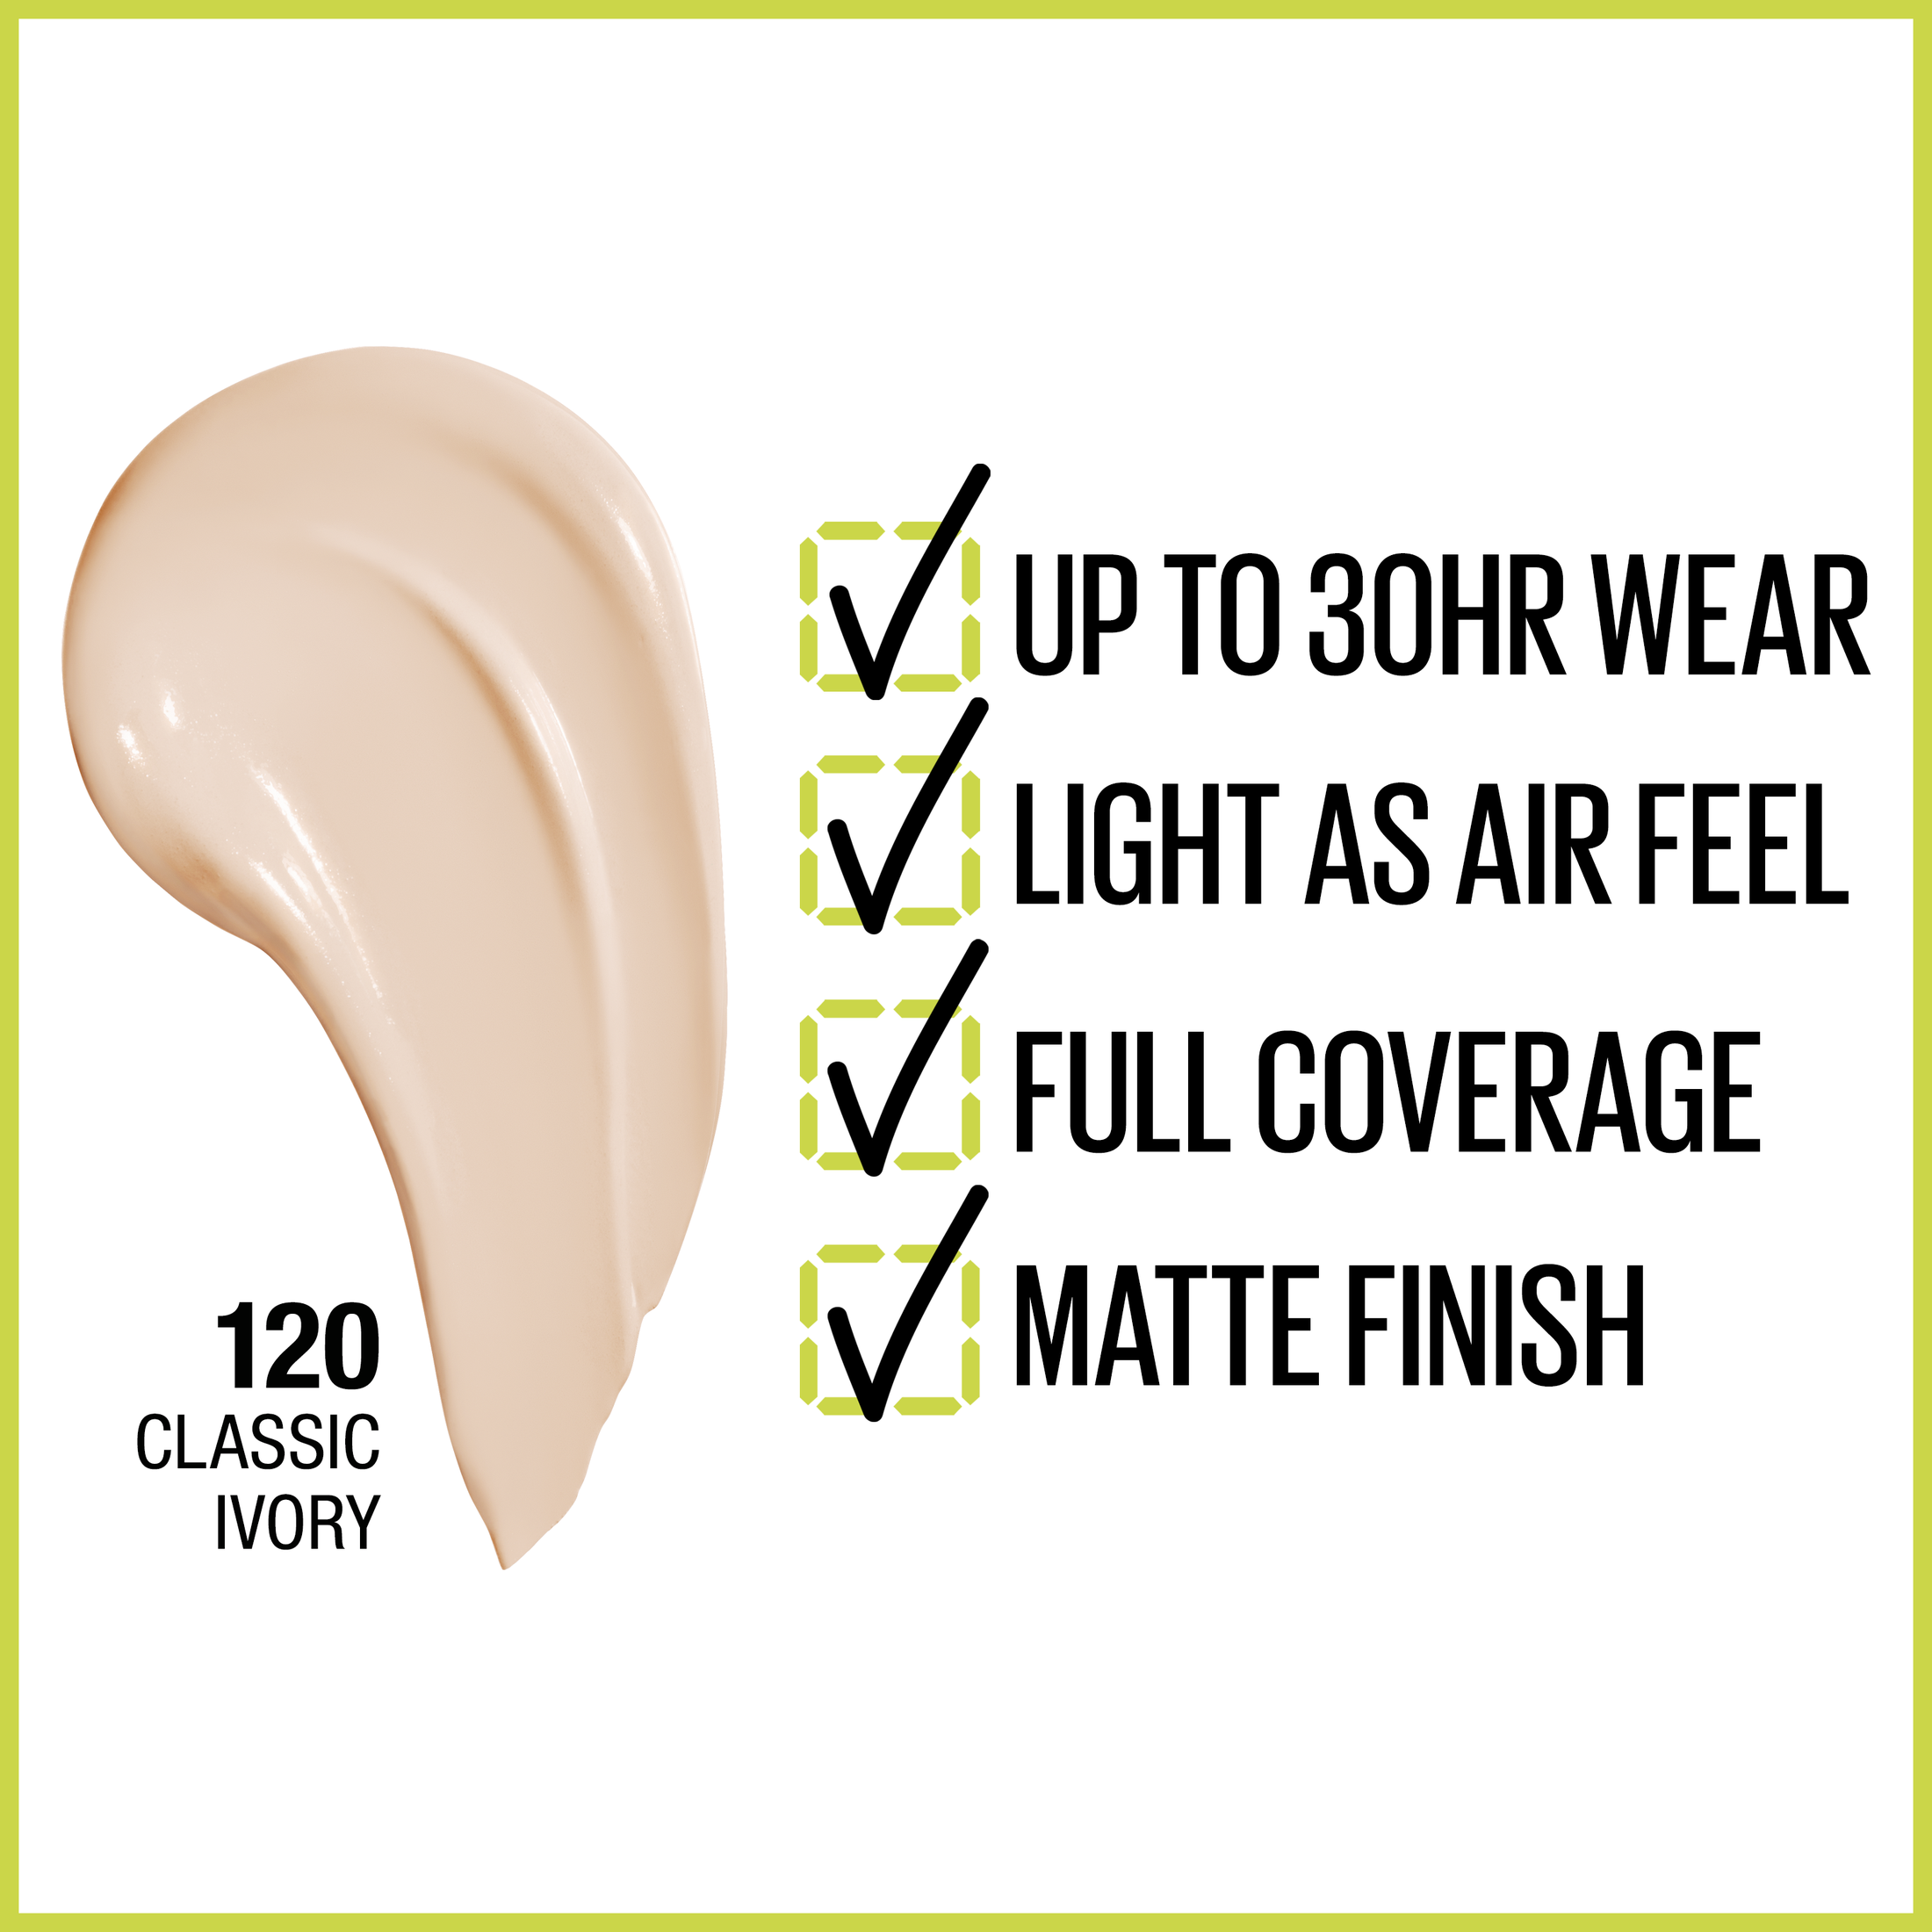 Maybelline Super Stay Liquid Foundation Makeup, Full Coverage, 120 Classic Ivory, 1 fl oz - image 3 of 8